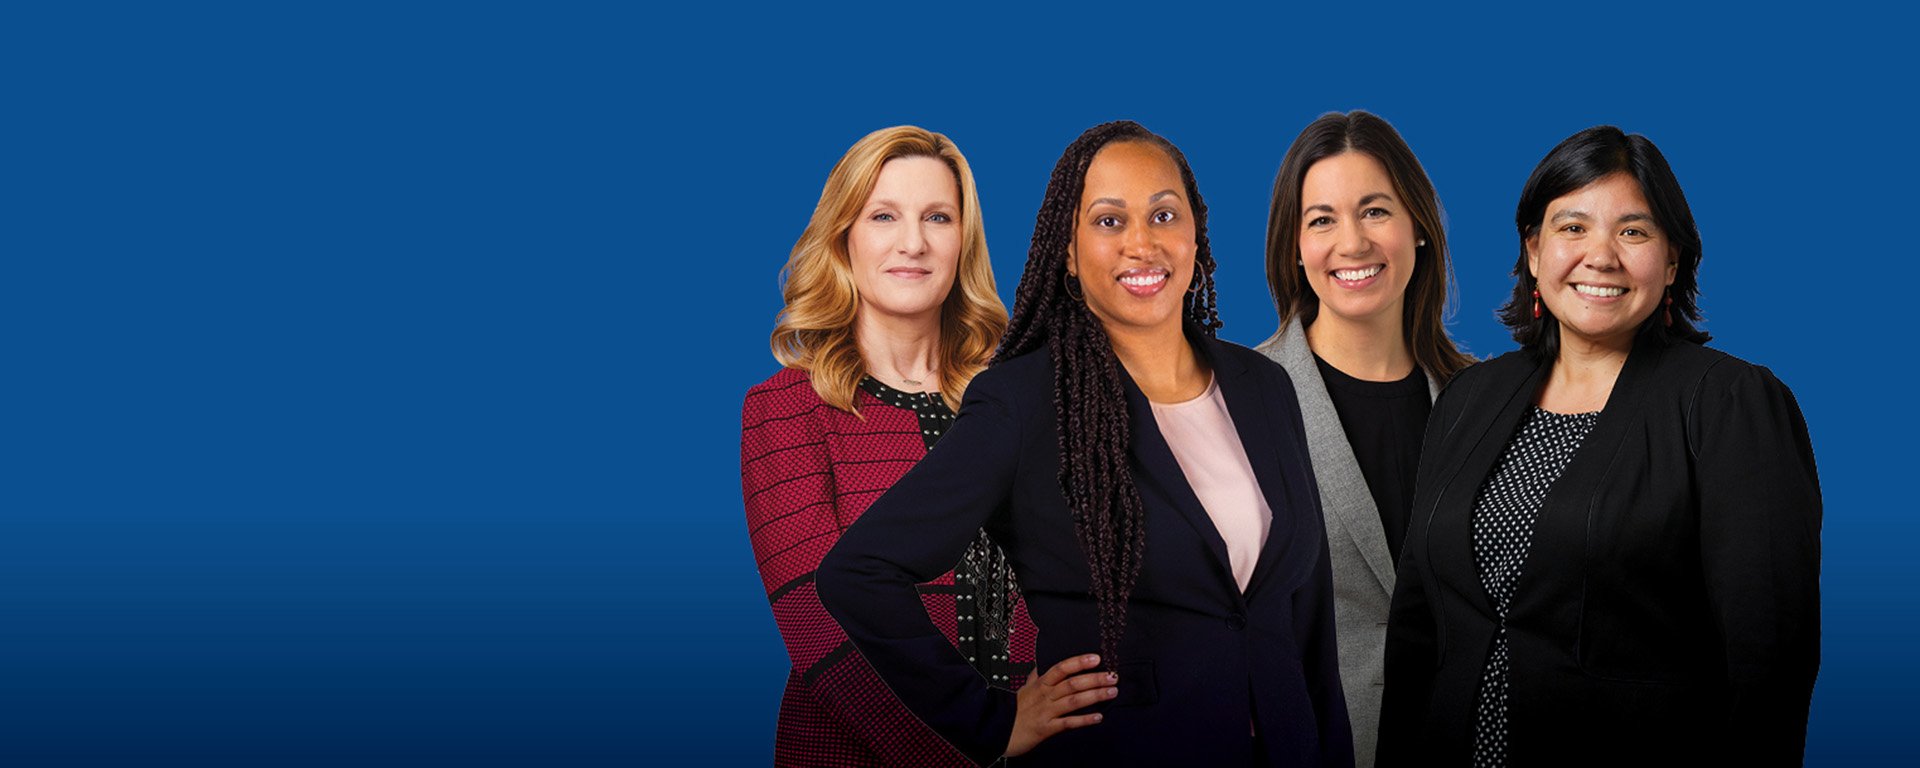 Four professional women posed as a group with a blue background.